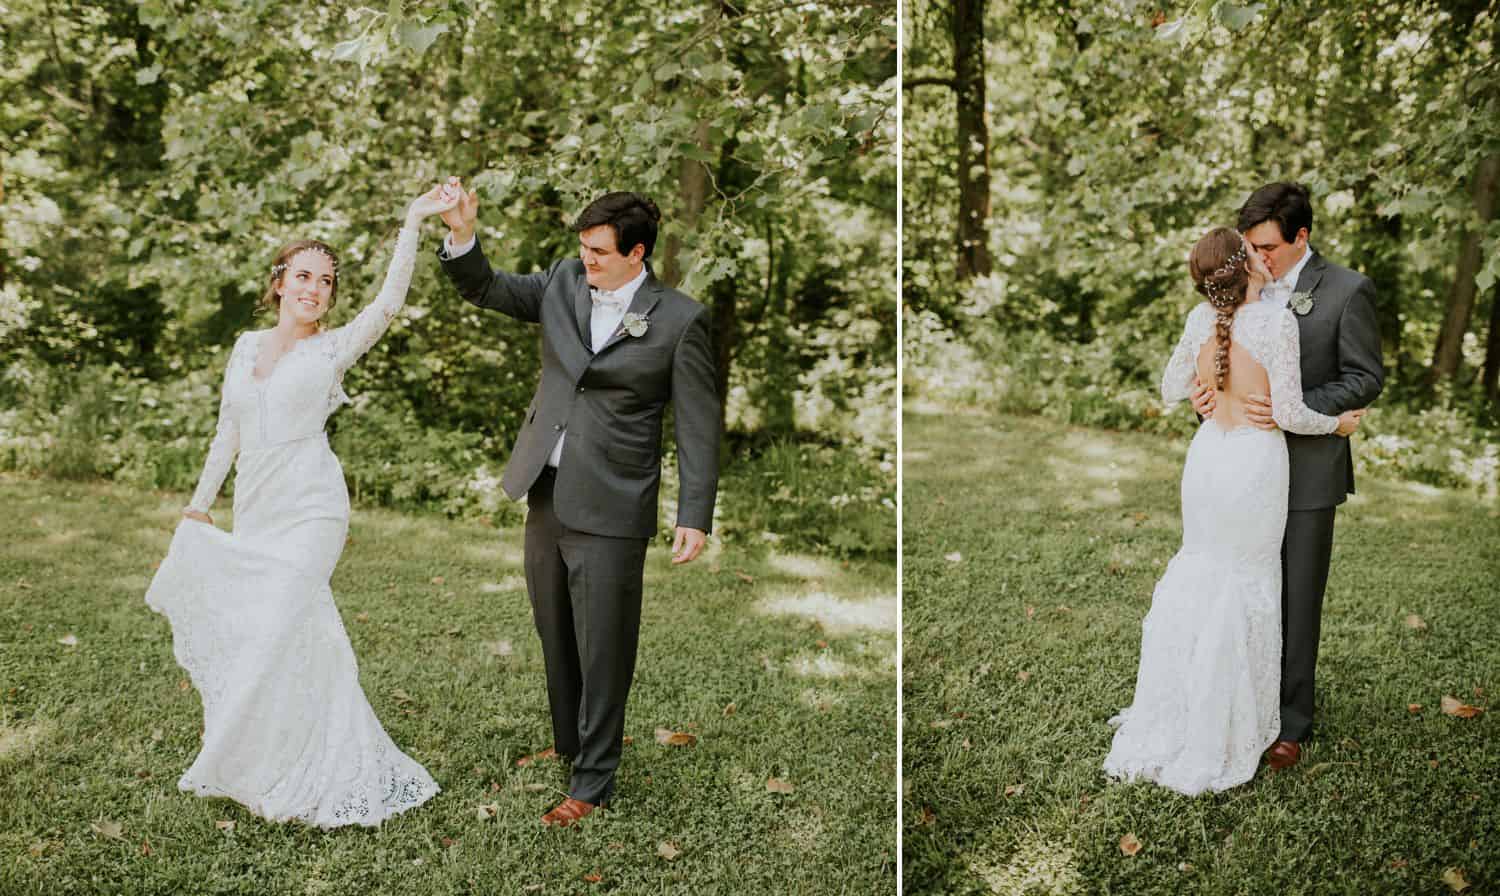 A groom twirls his bride then pulls her in for a kiss during their first look.